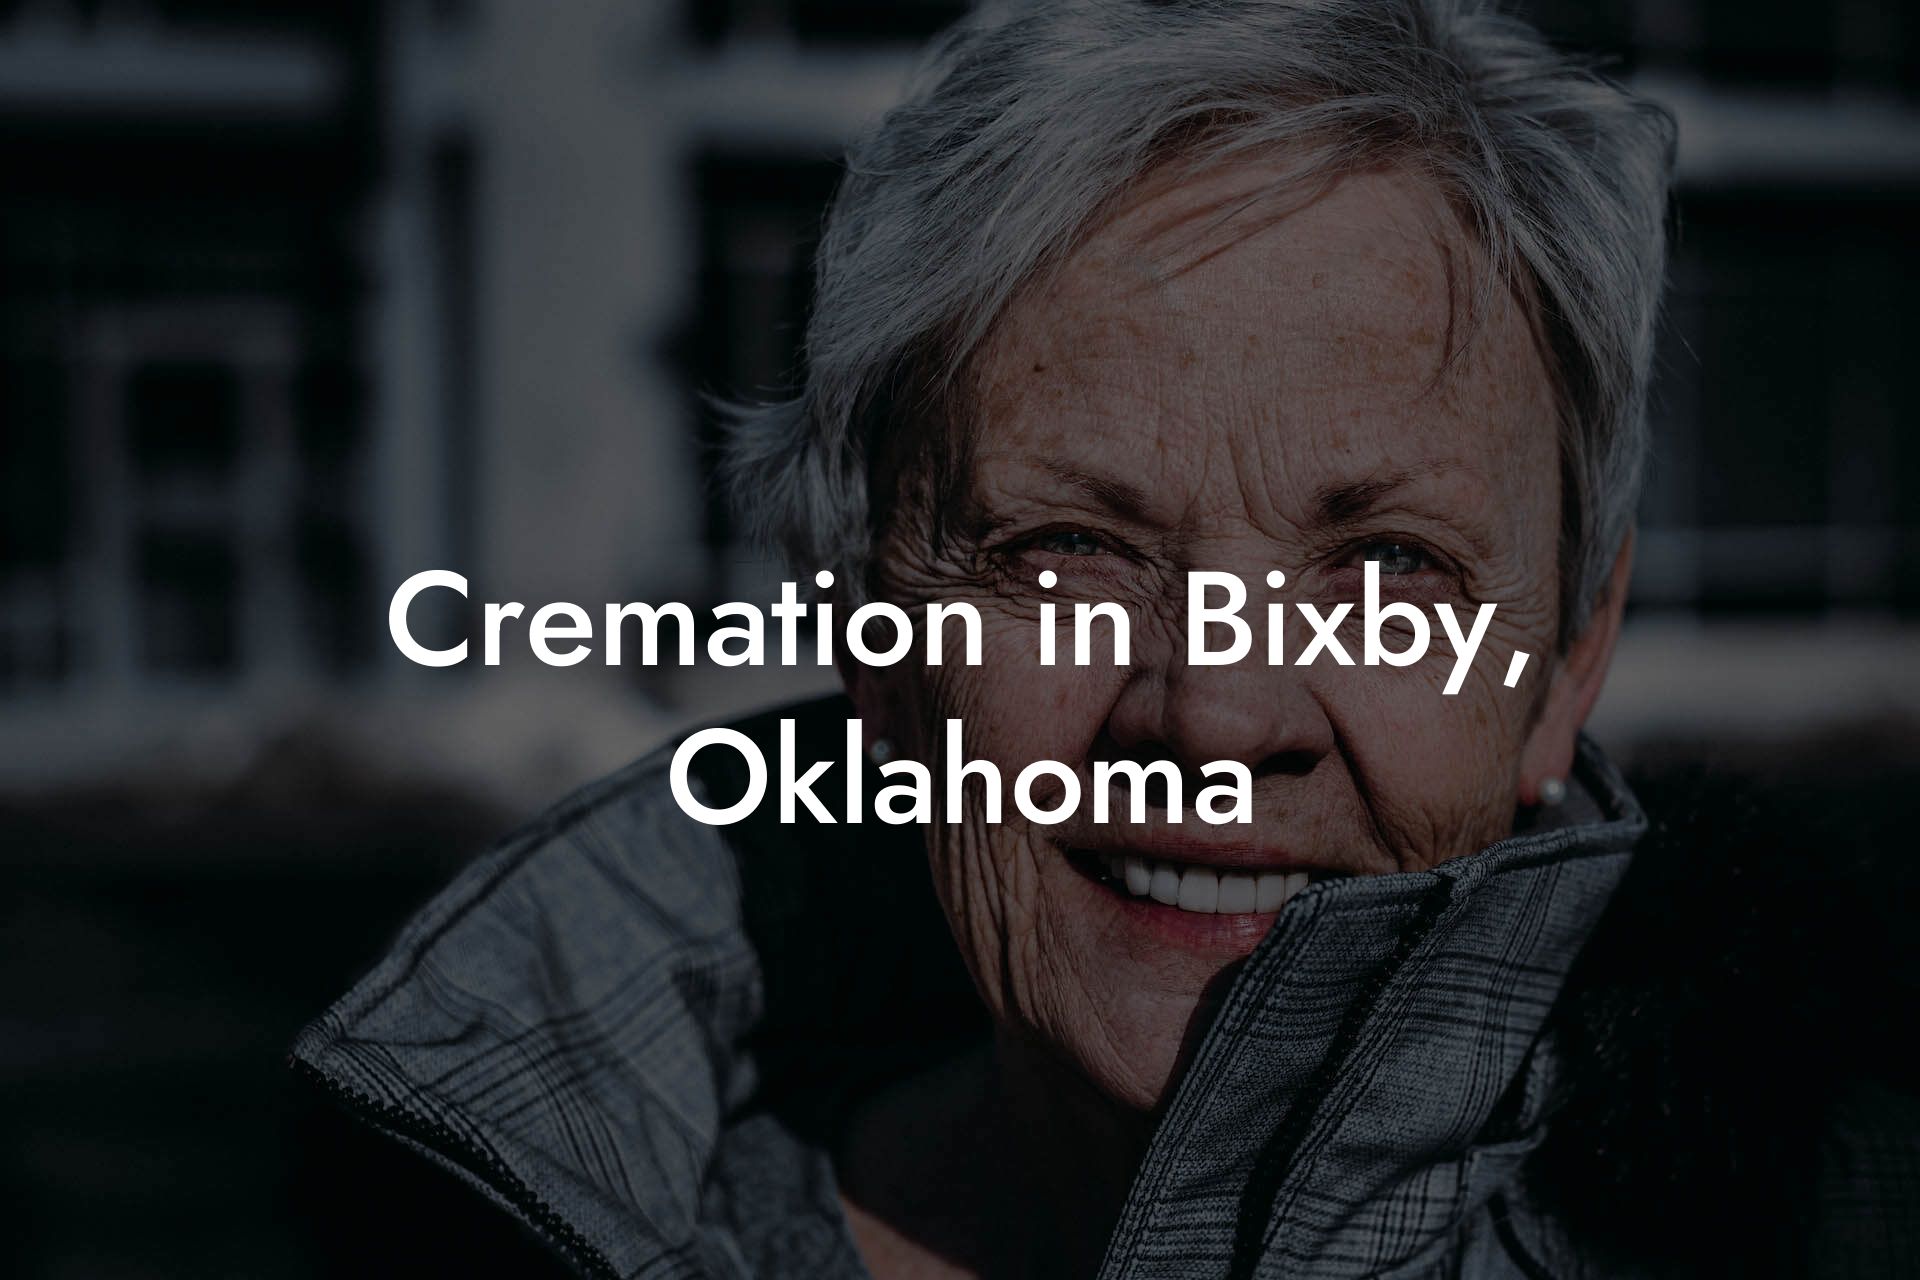 Cremation in Bixby, Oklahoma